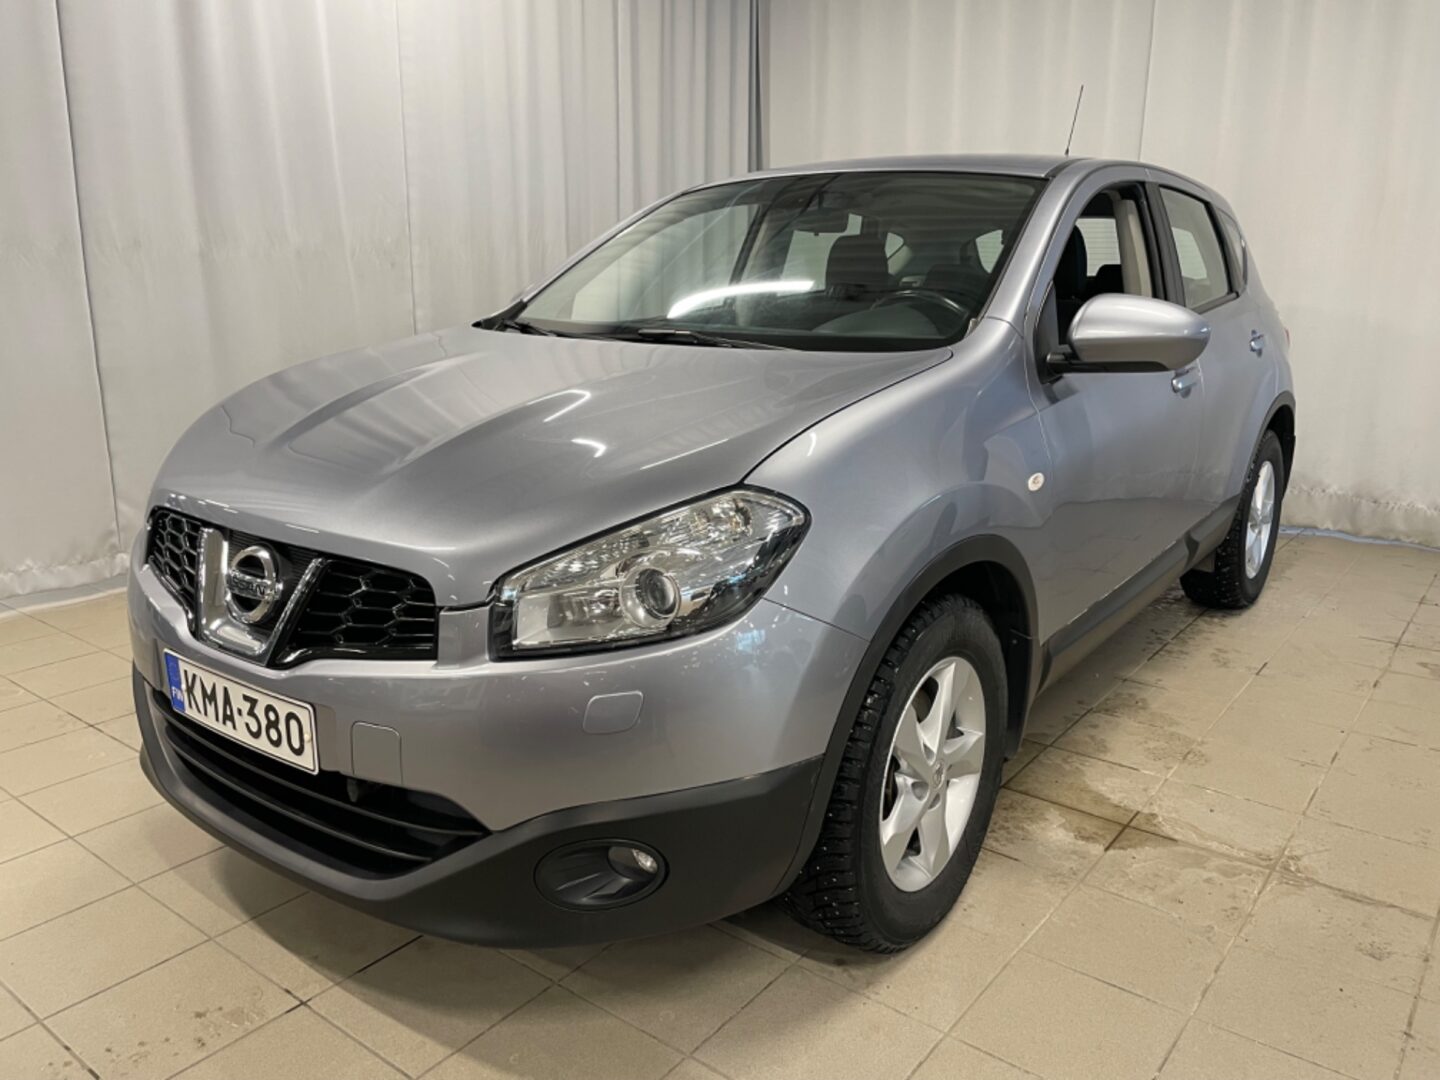 Nissan Qashqai 1,6L Stop / Start System Acenta 2WD 5M/T Connect